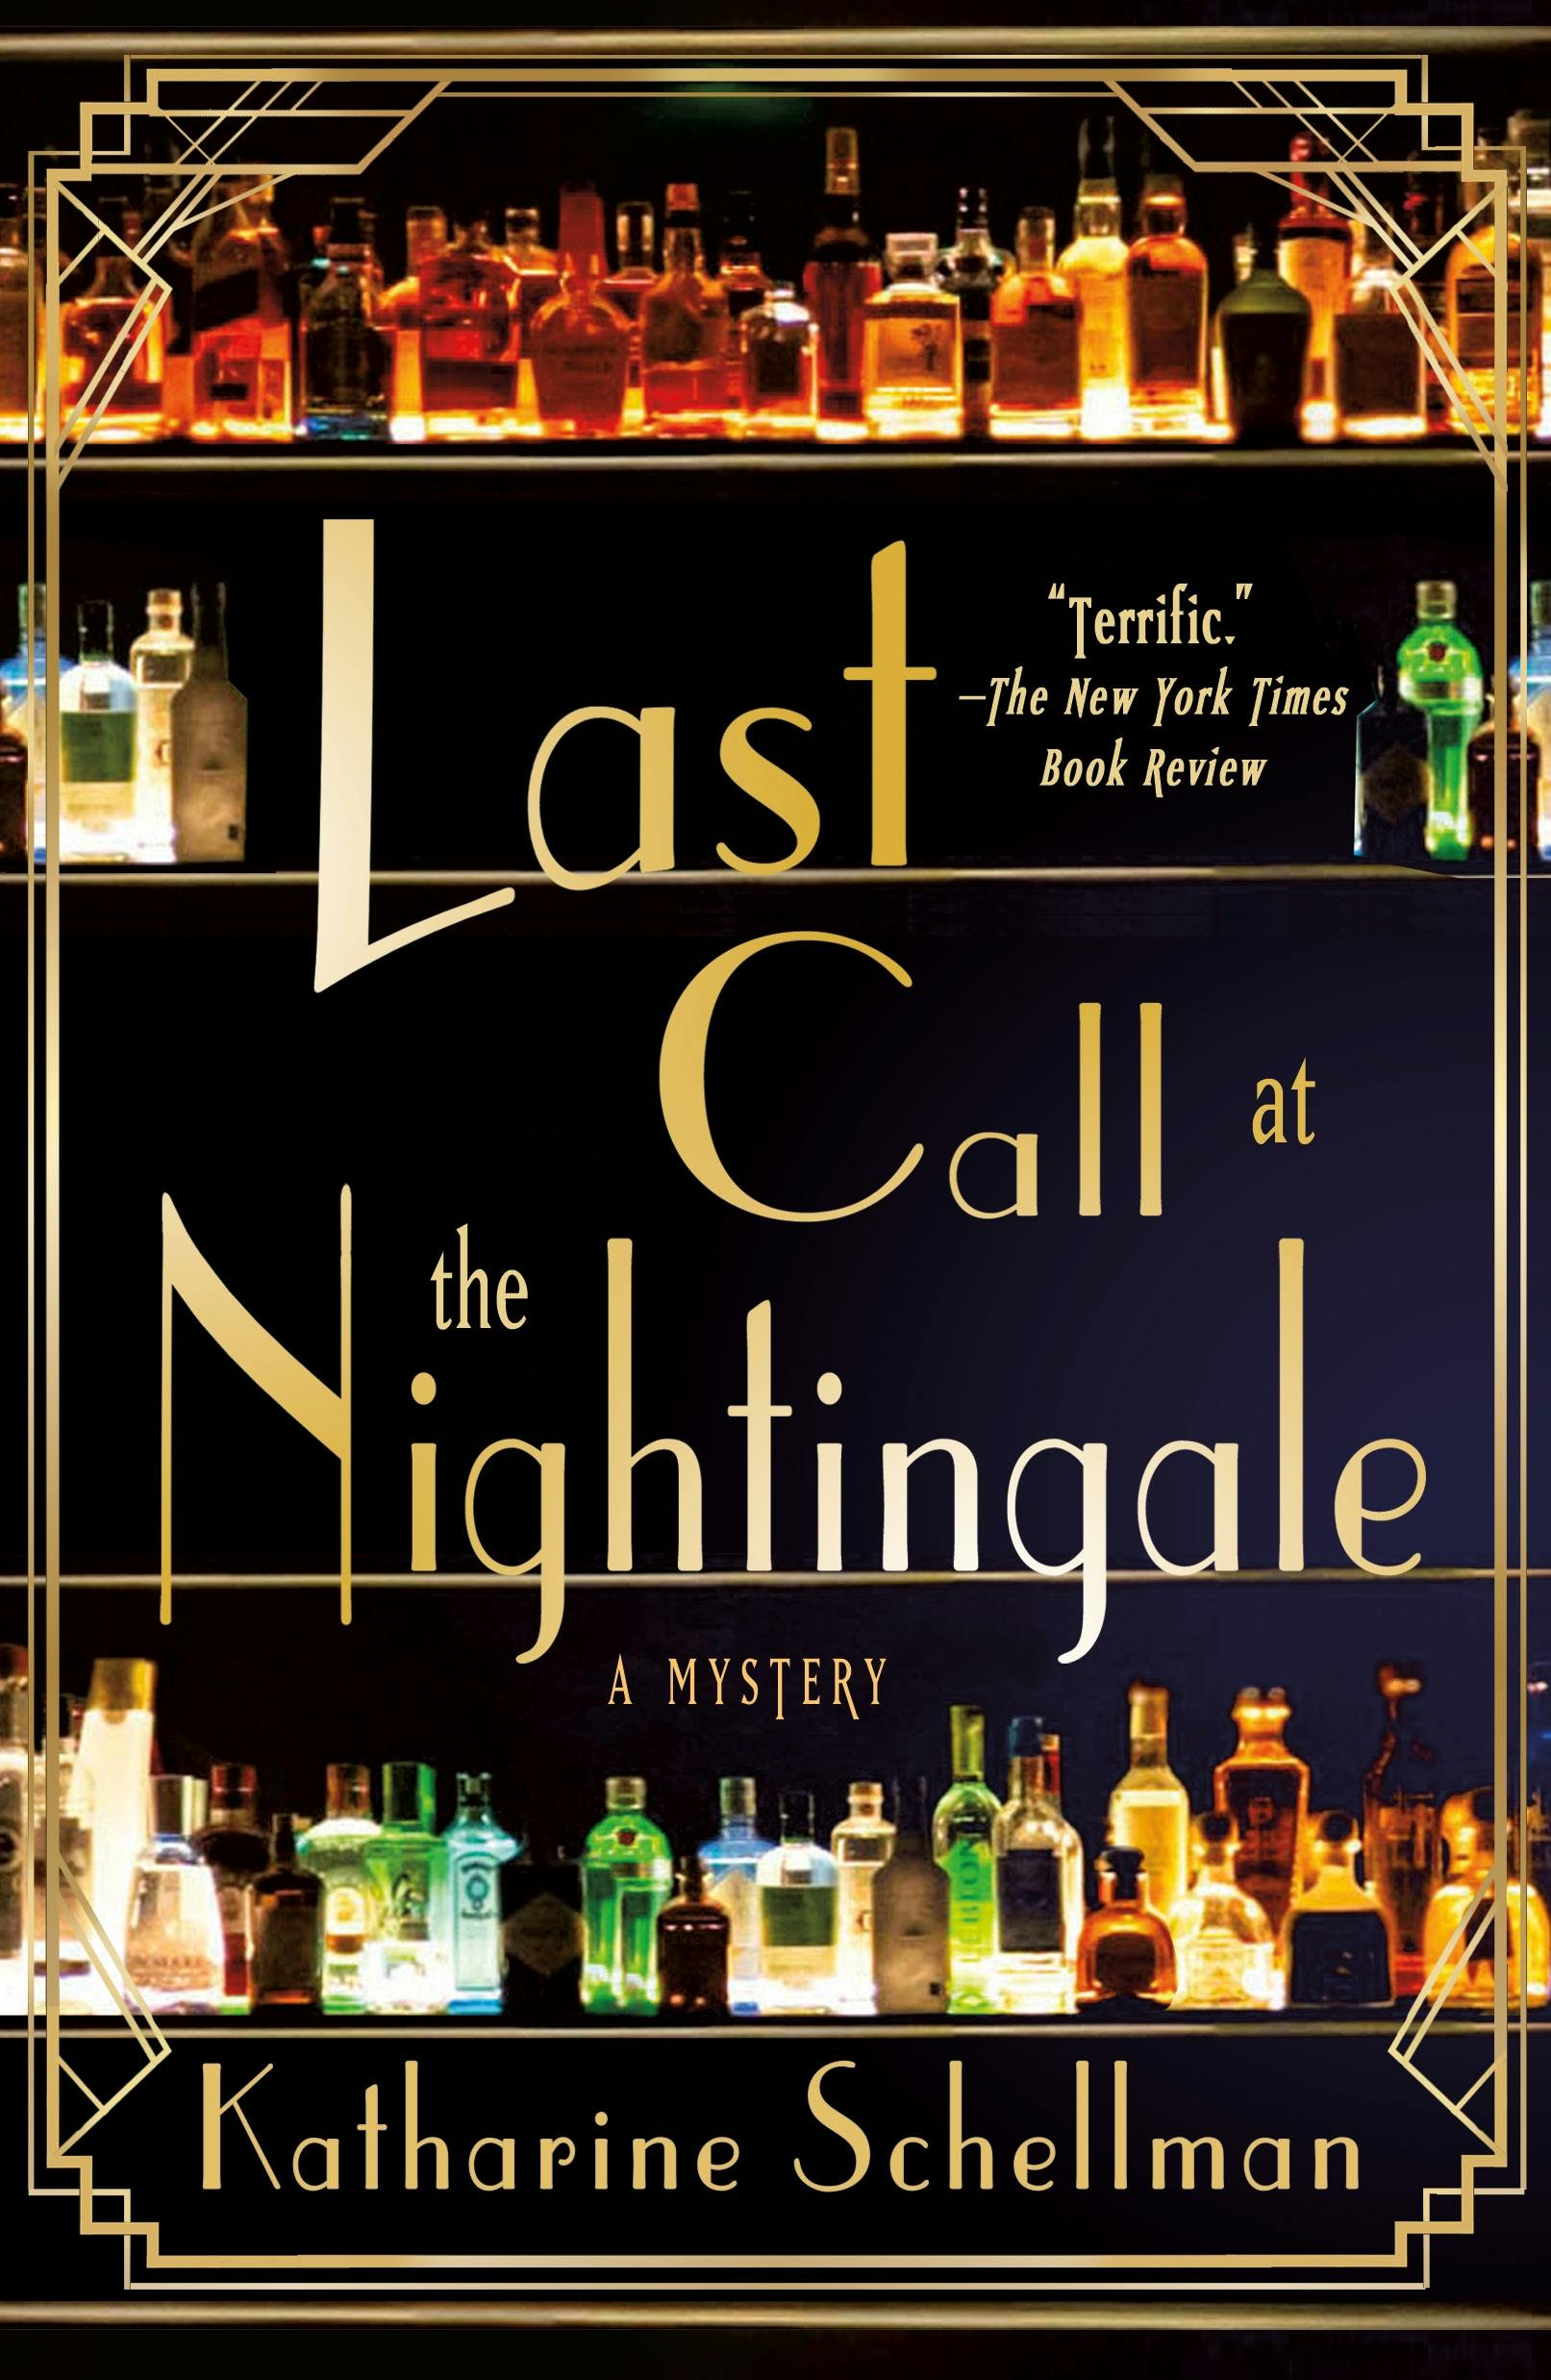 Last Call at the Nightingale by Katharine Schellman!! 🌟 Arc